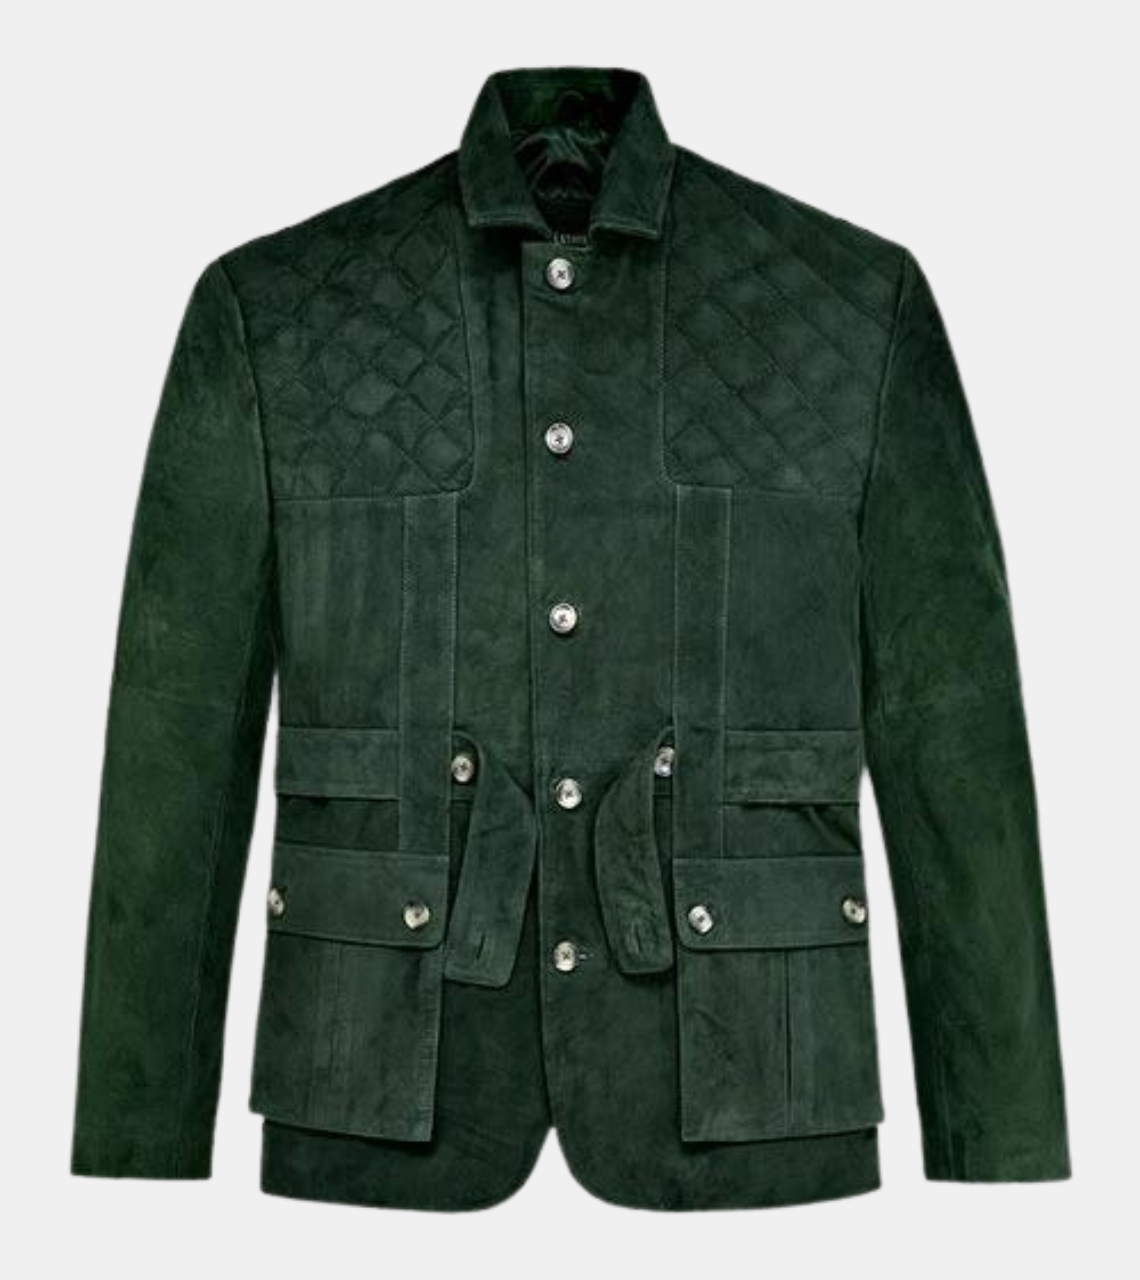 Mateo Men's Green Suede Leather Jacket